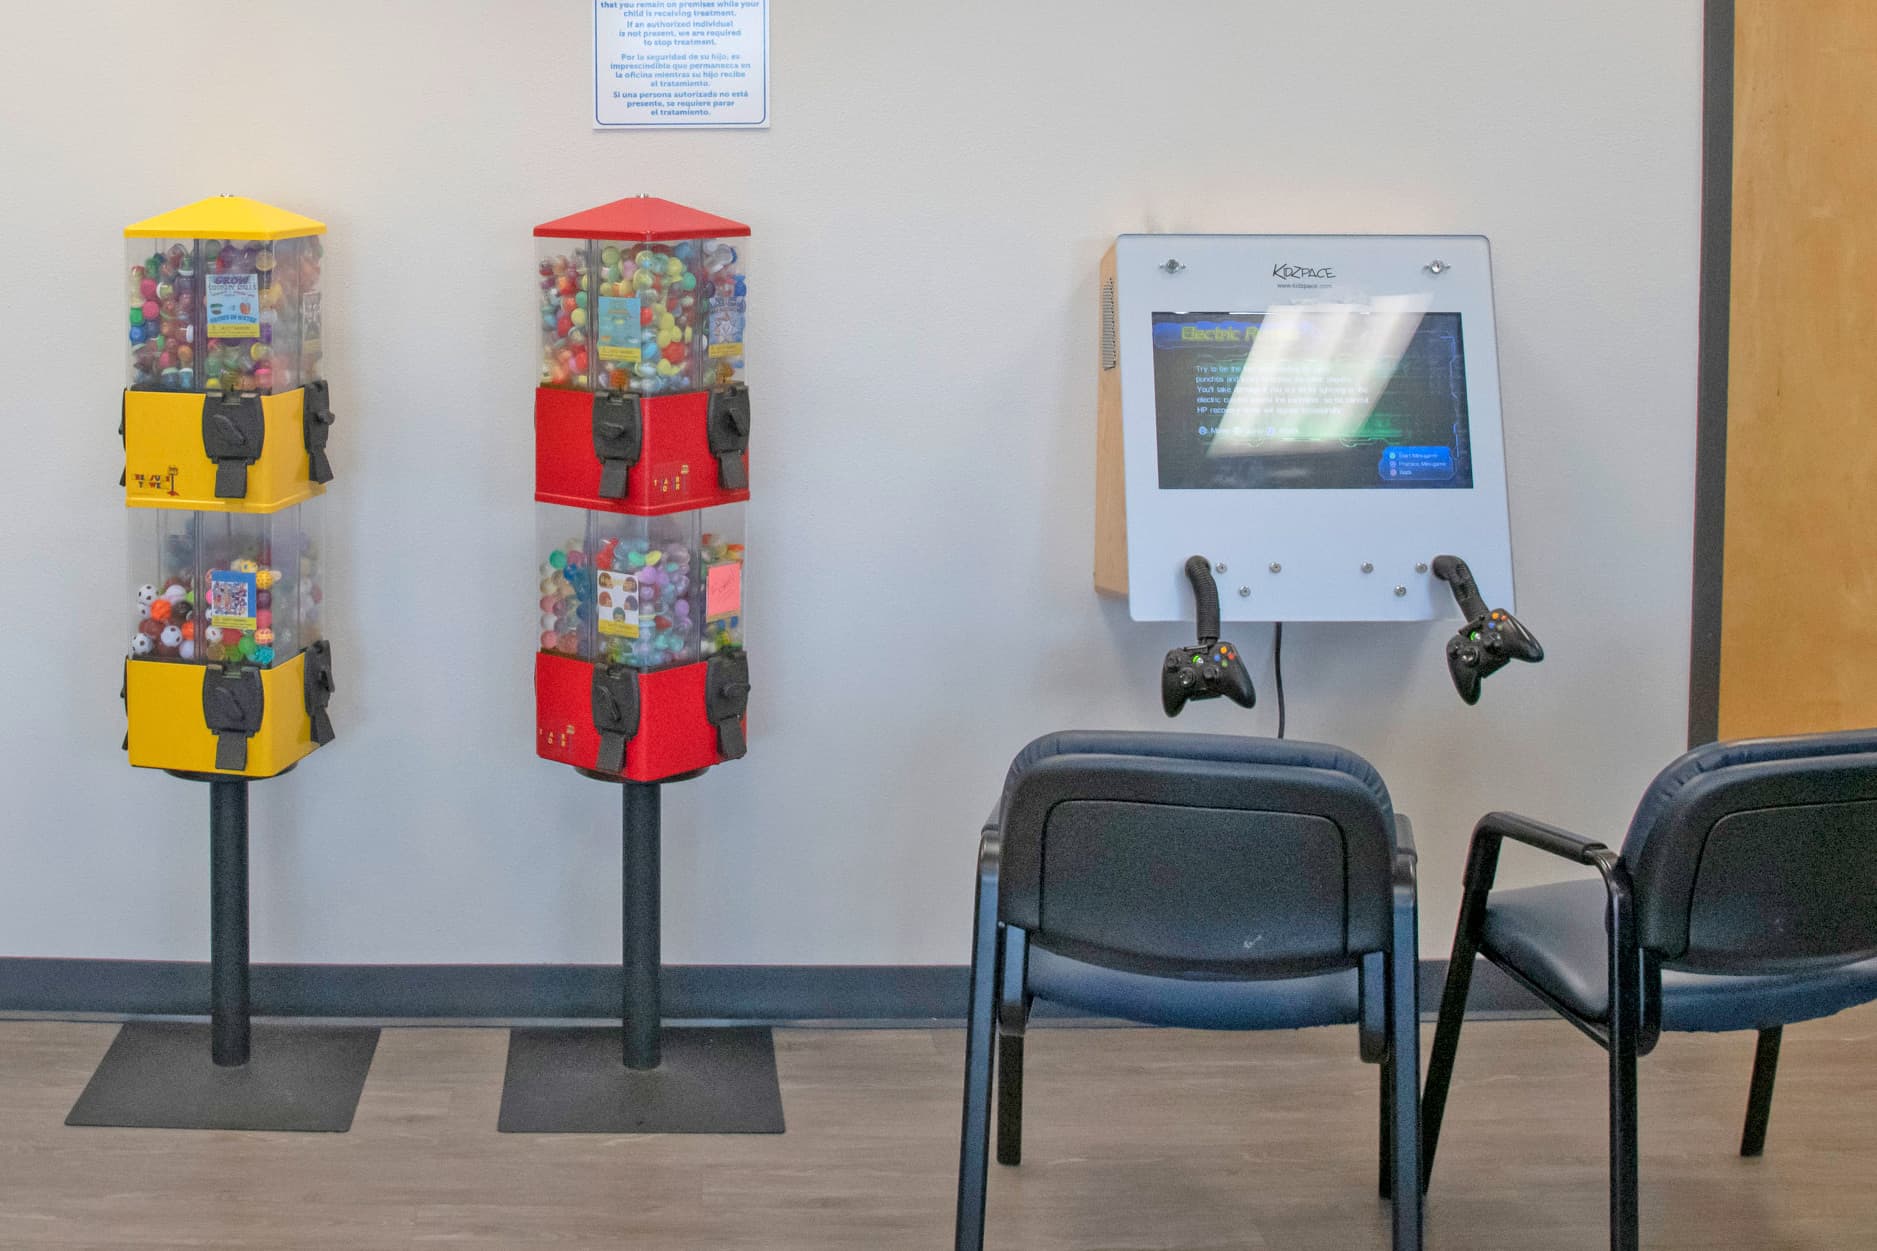 kid's dental office with video games and a red and yellow vending machines